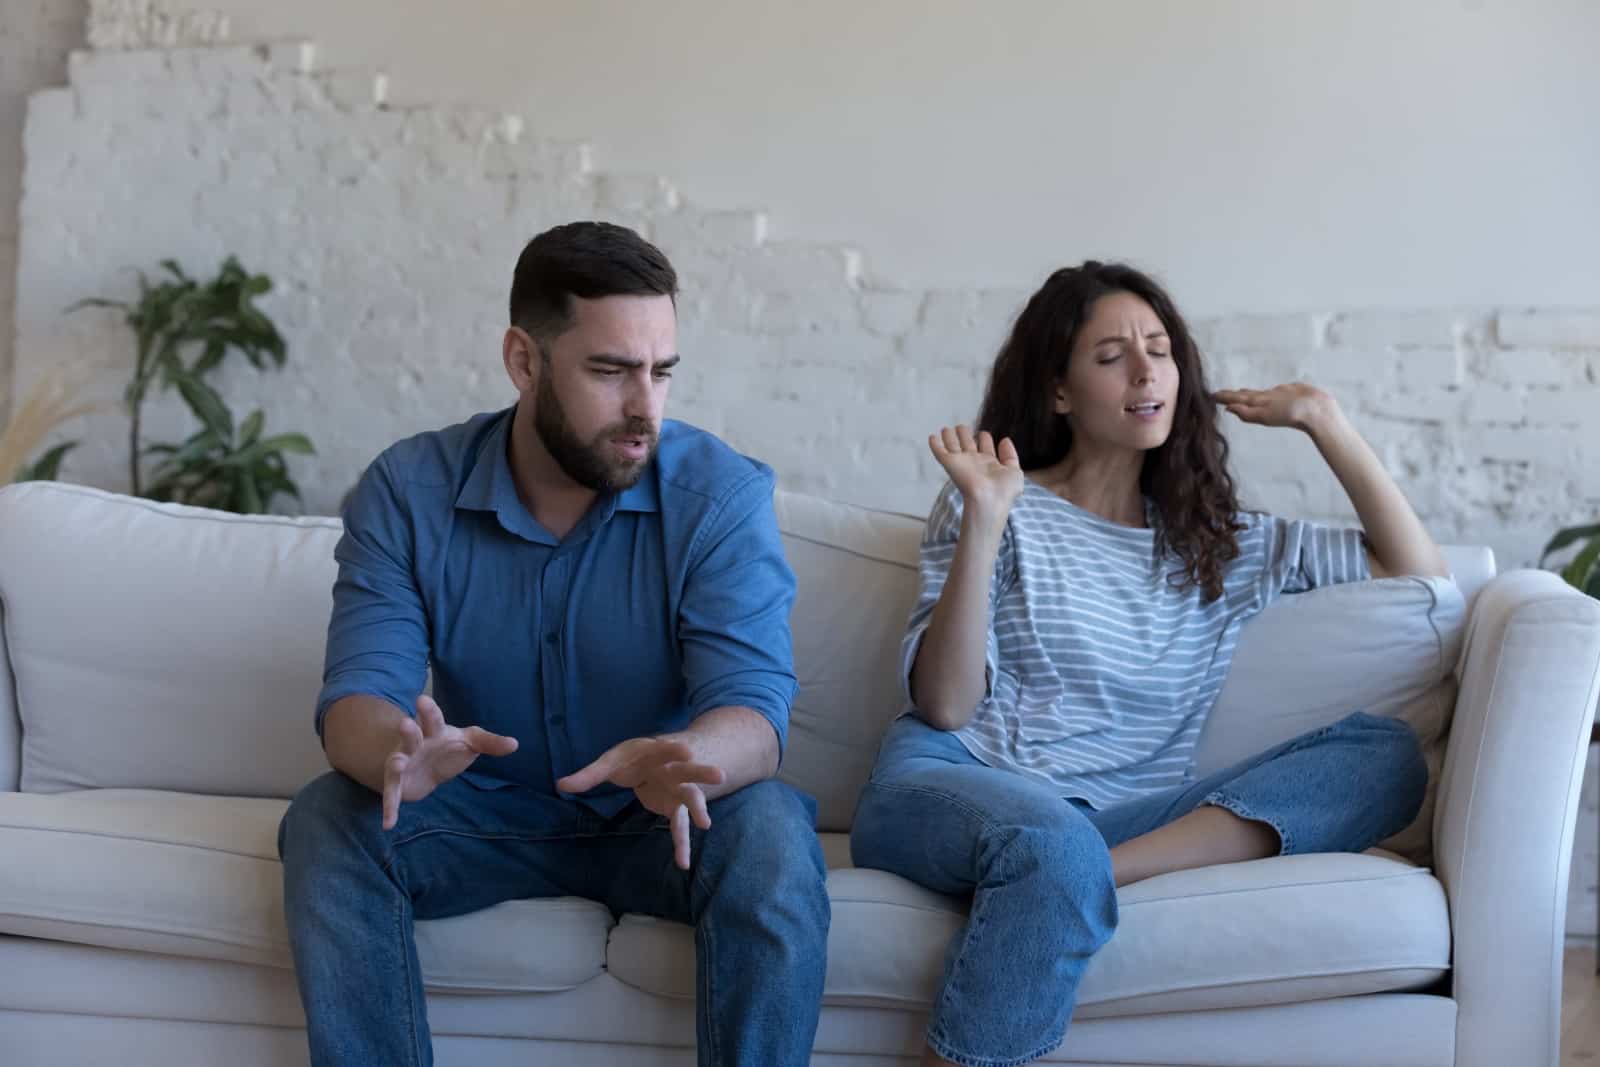 Image Credit: Shutterstock / fizkes <p><span>When “We need to talk” turns into “We never talk,” you’re not just out of sync. You’re on different frequencies, possibly different planets.</span></p>